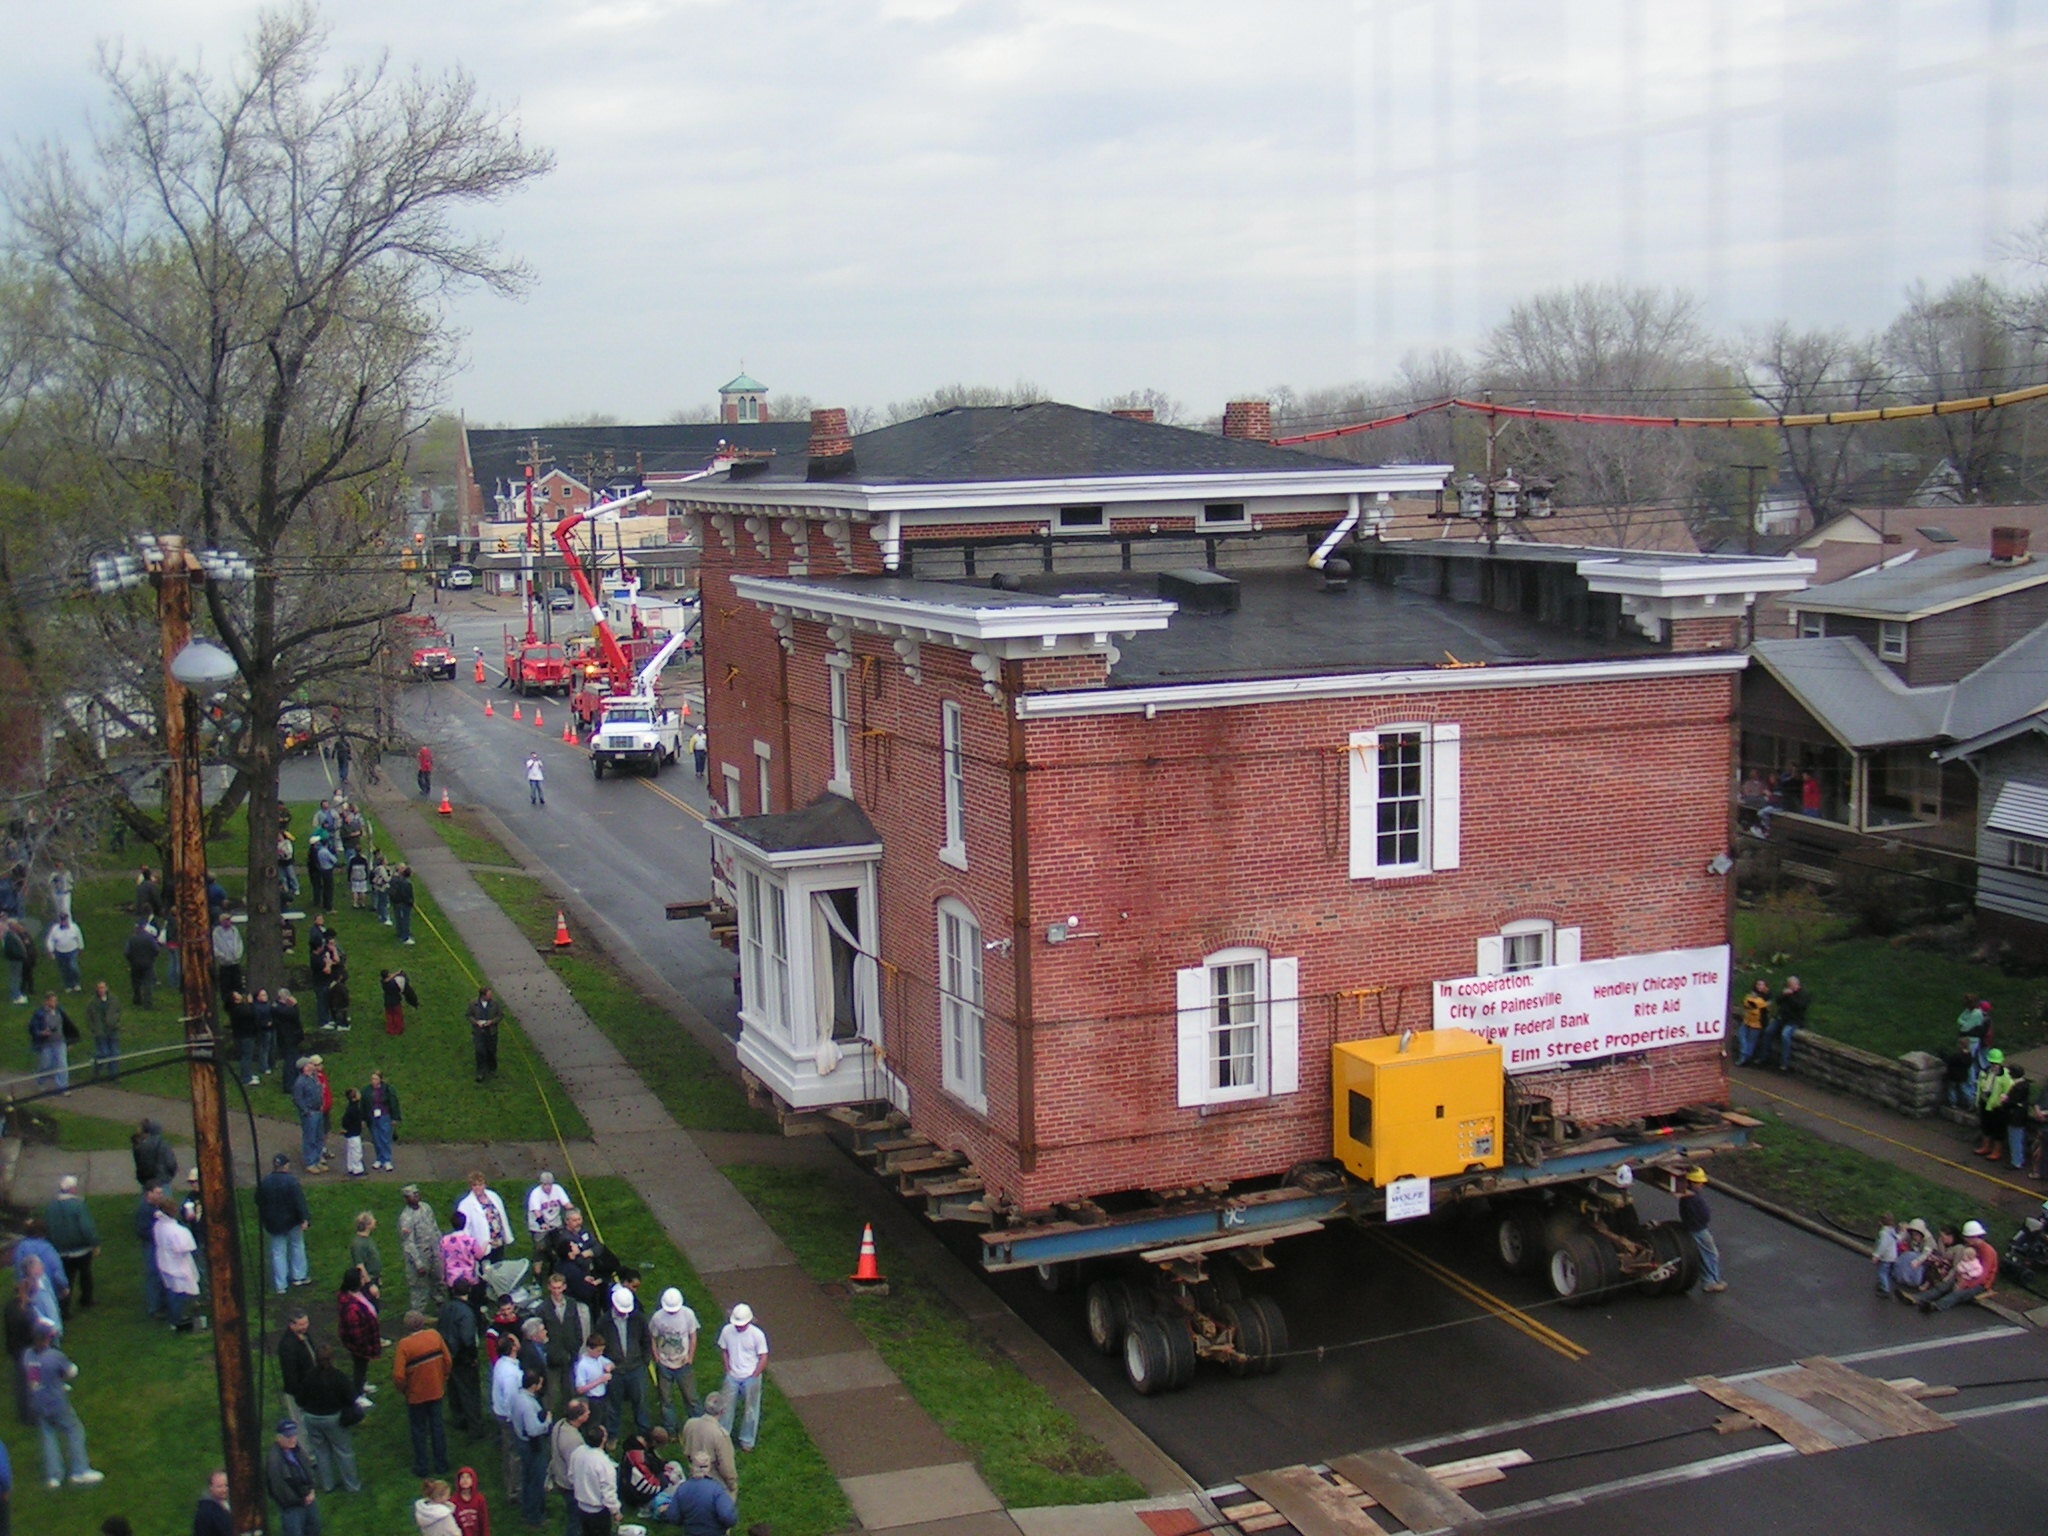 Historic Gage House lifted on dolly moving through streets on dolly with by standing crowd.